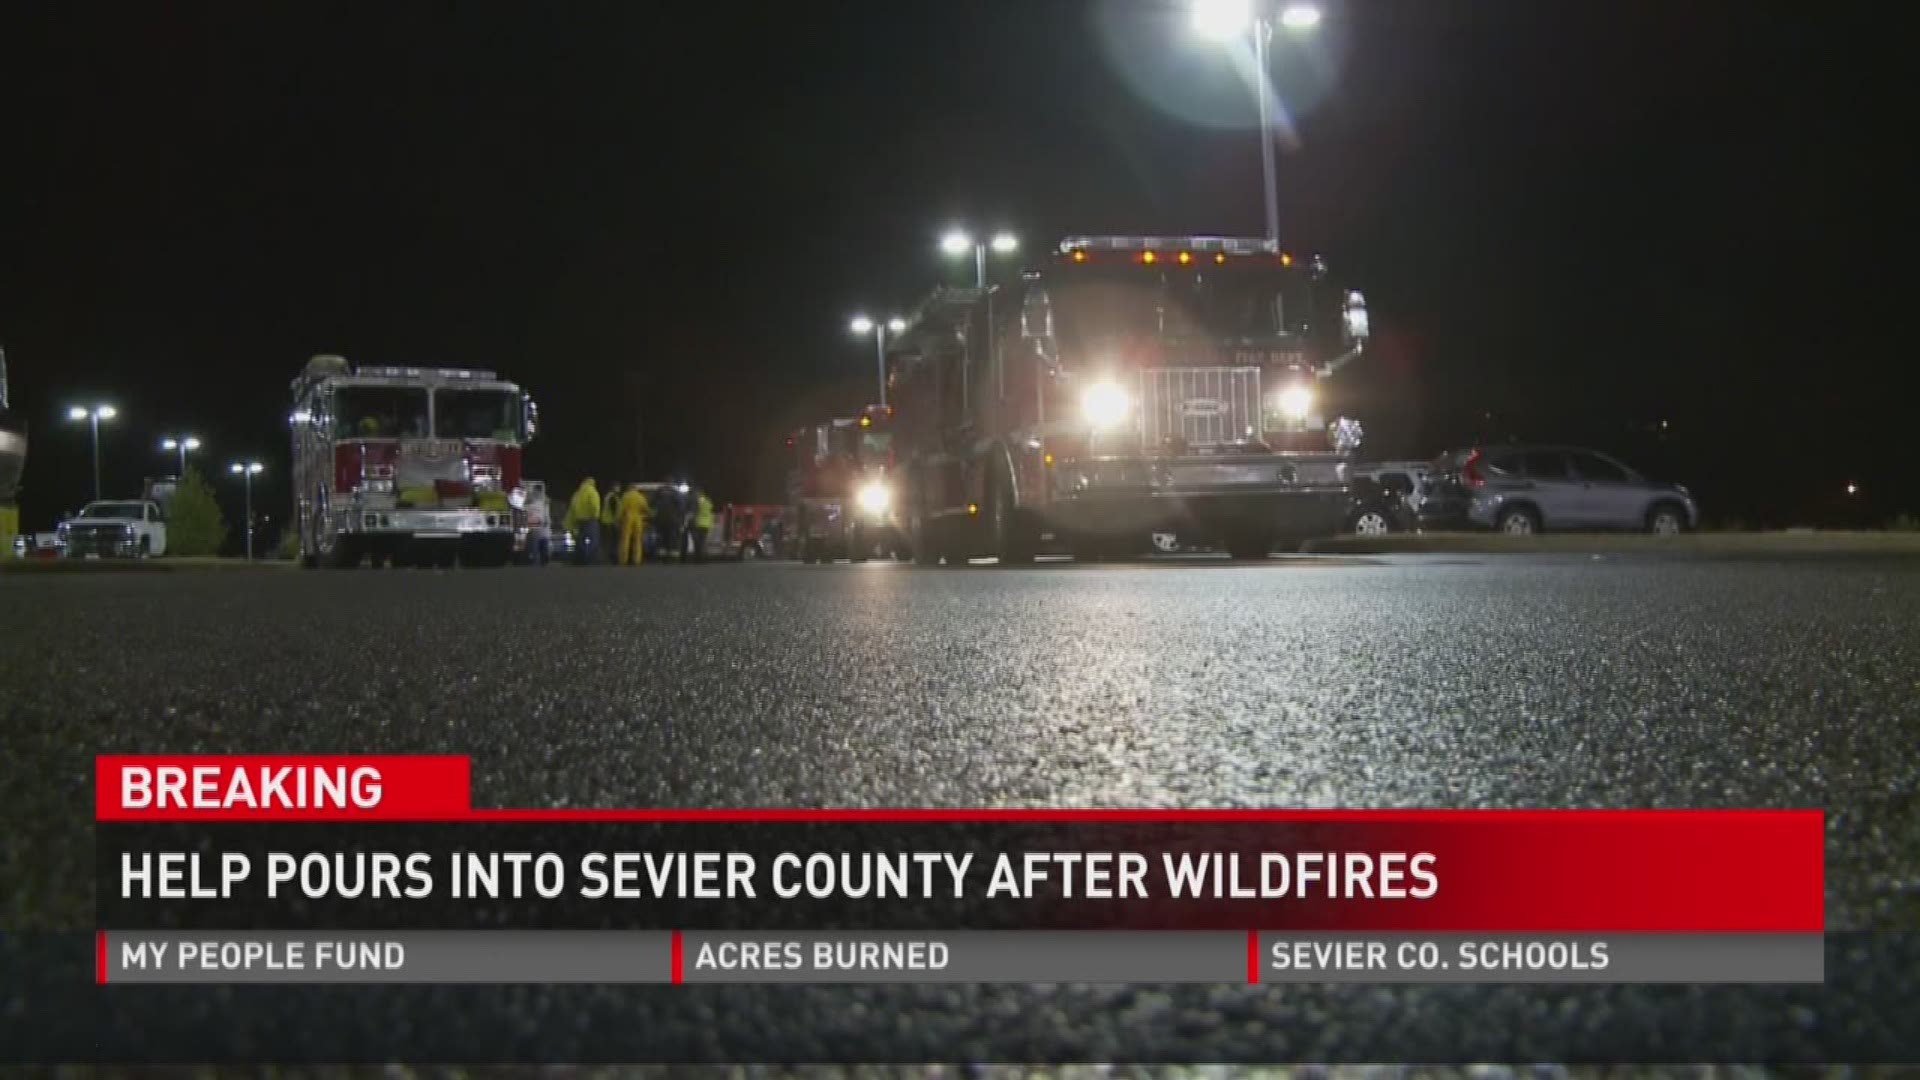 Reporter Leslie Ackerson gives us more information on how search crews, volunteers and emergency responders are helping victims of the wildfires.